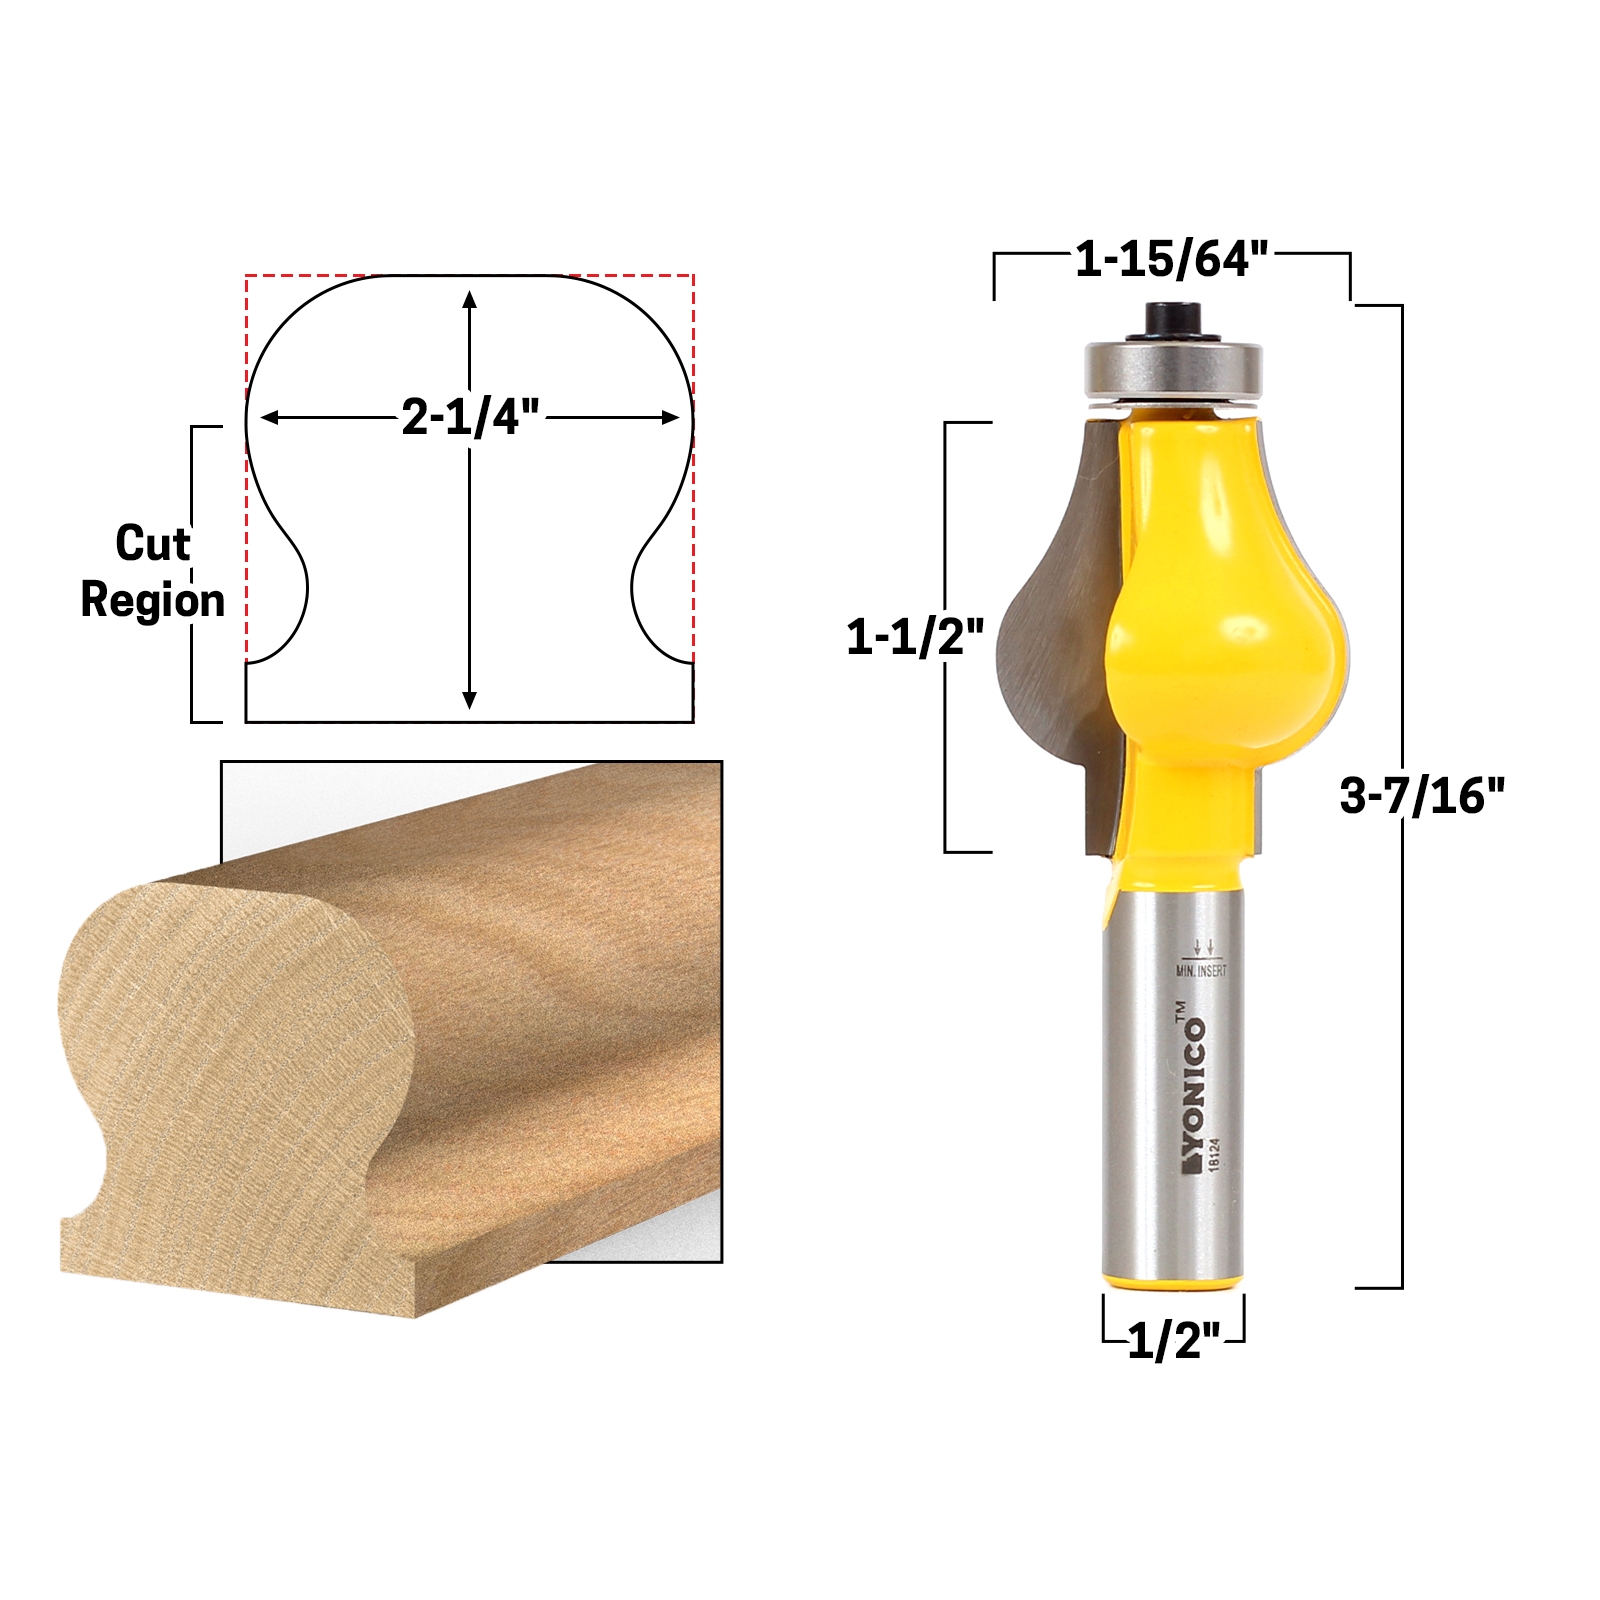 Yonico 18226 2 Bit Handrail Router Bit Set with Thumbnail Bead/Bead 1/2-Inch Shank